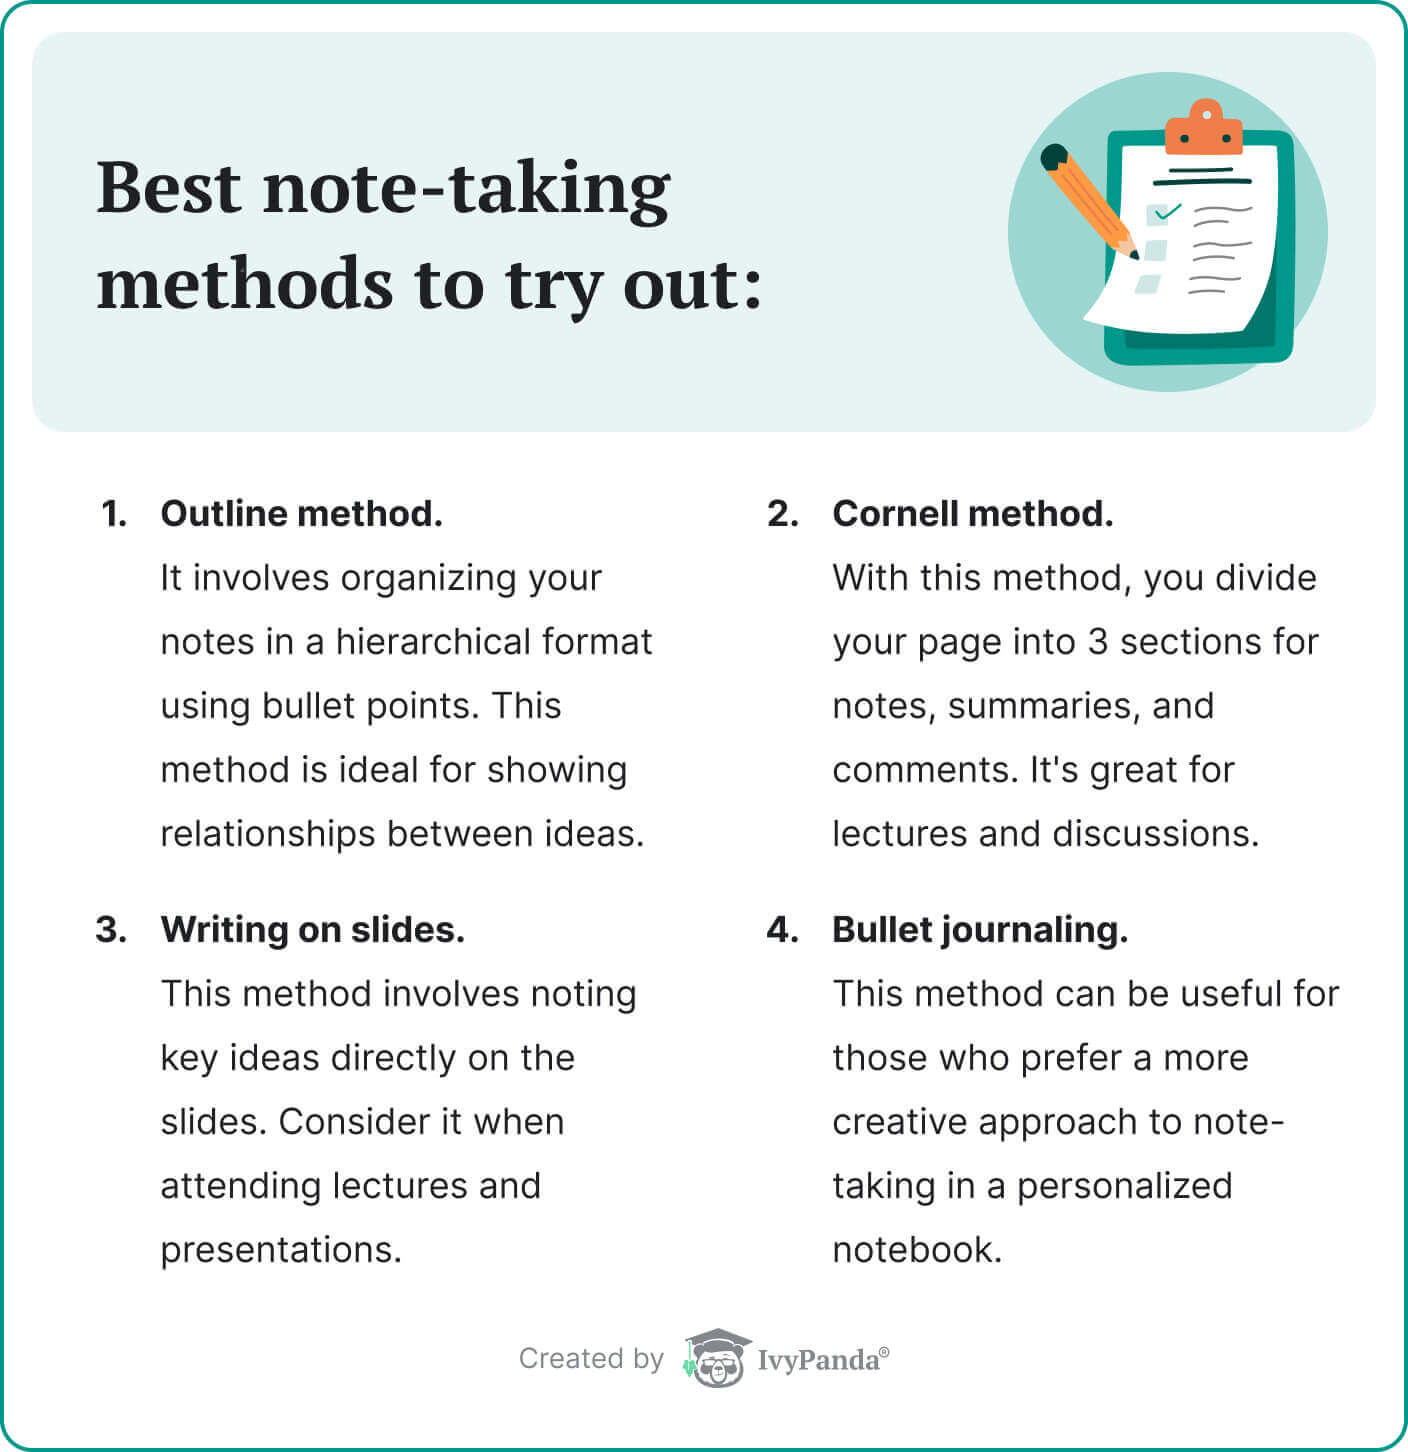 The picture describes some of the best note-taking methods for college freshmen.